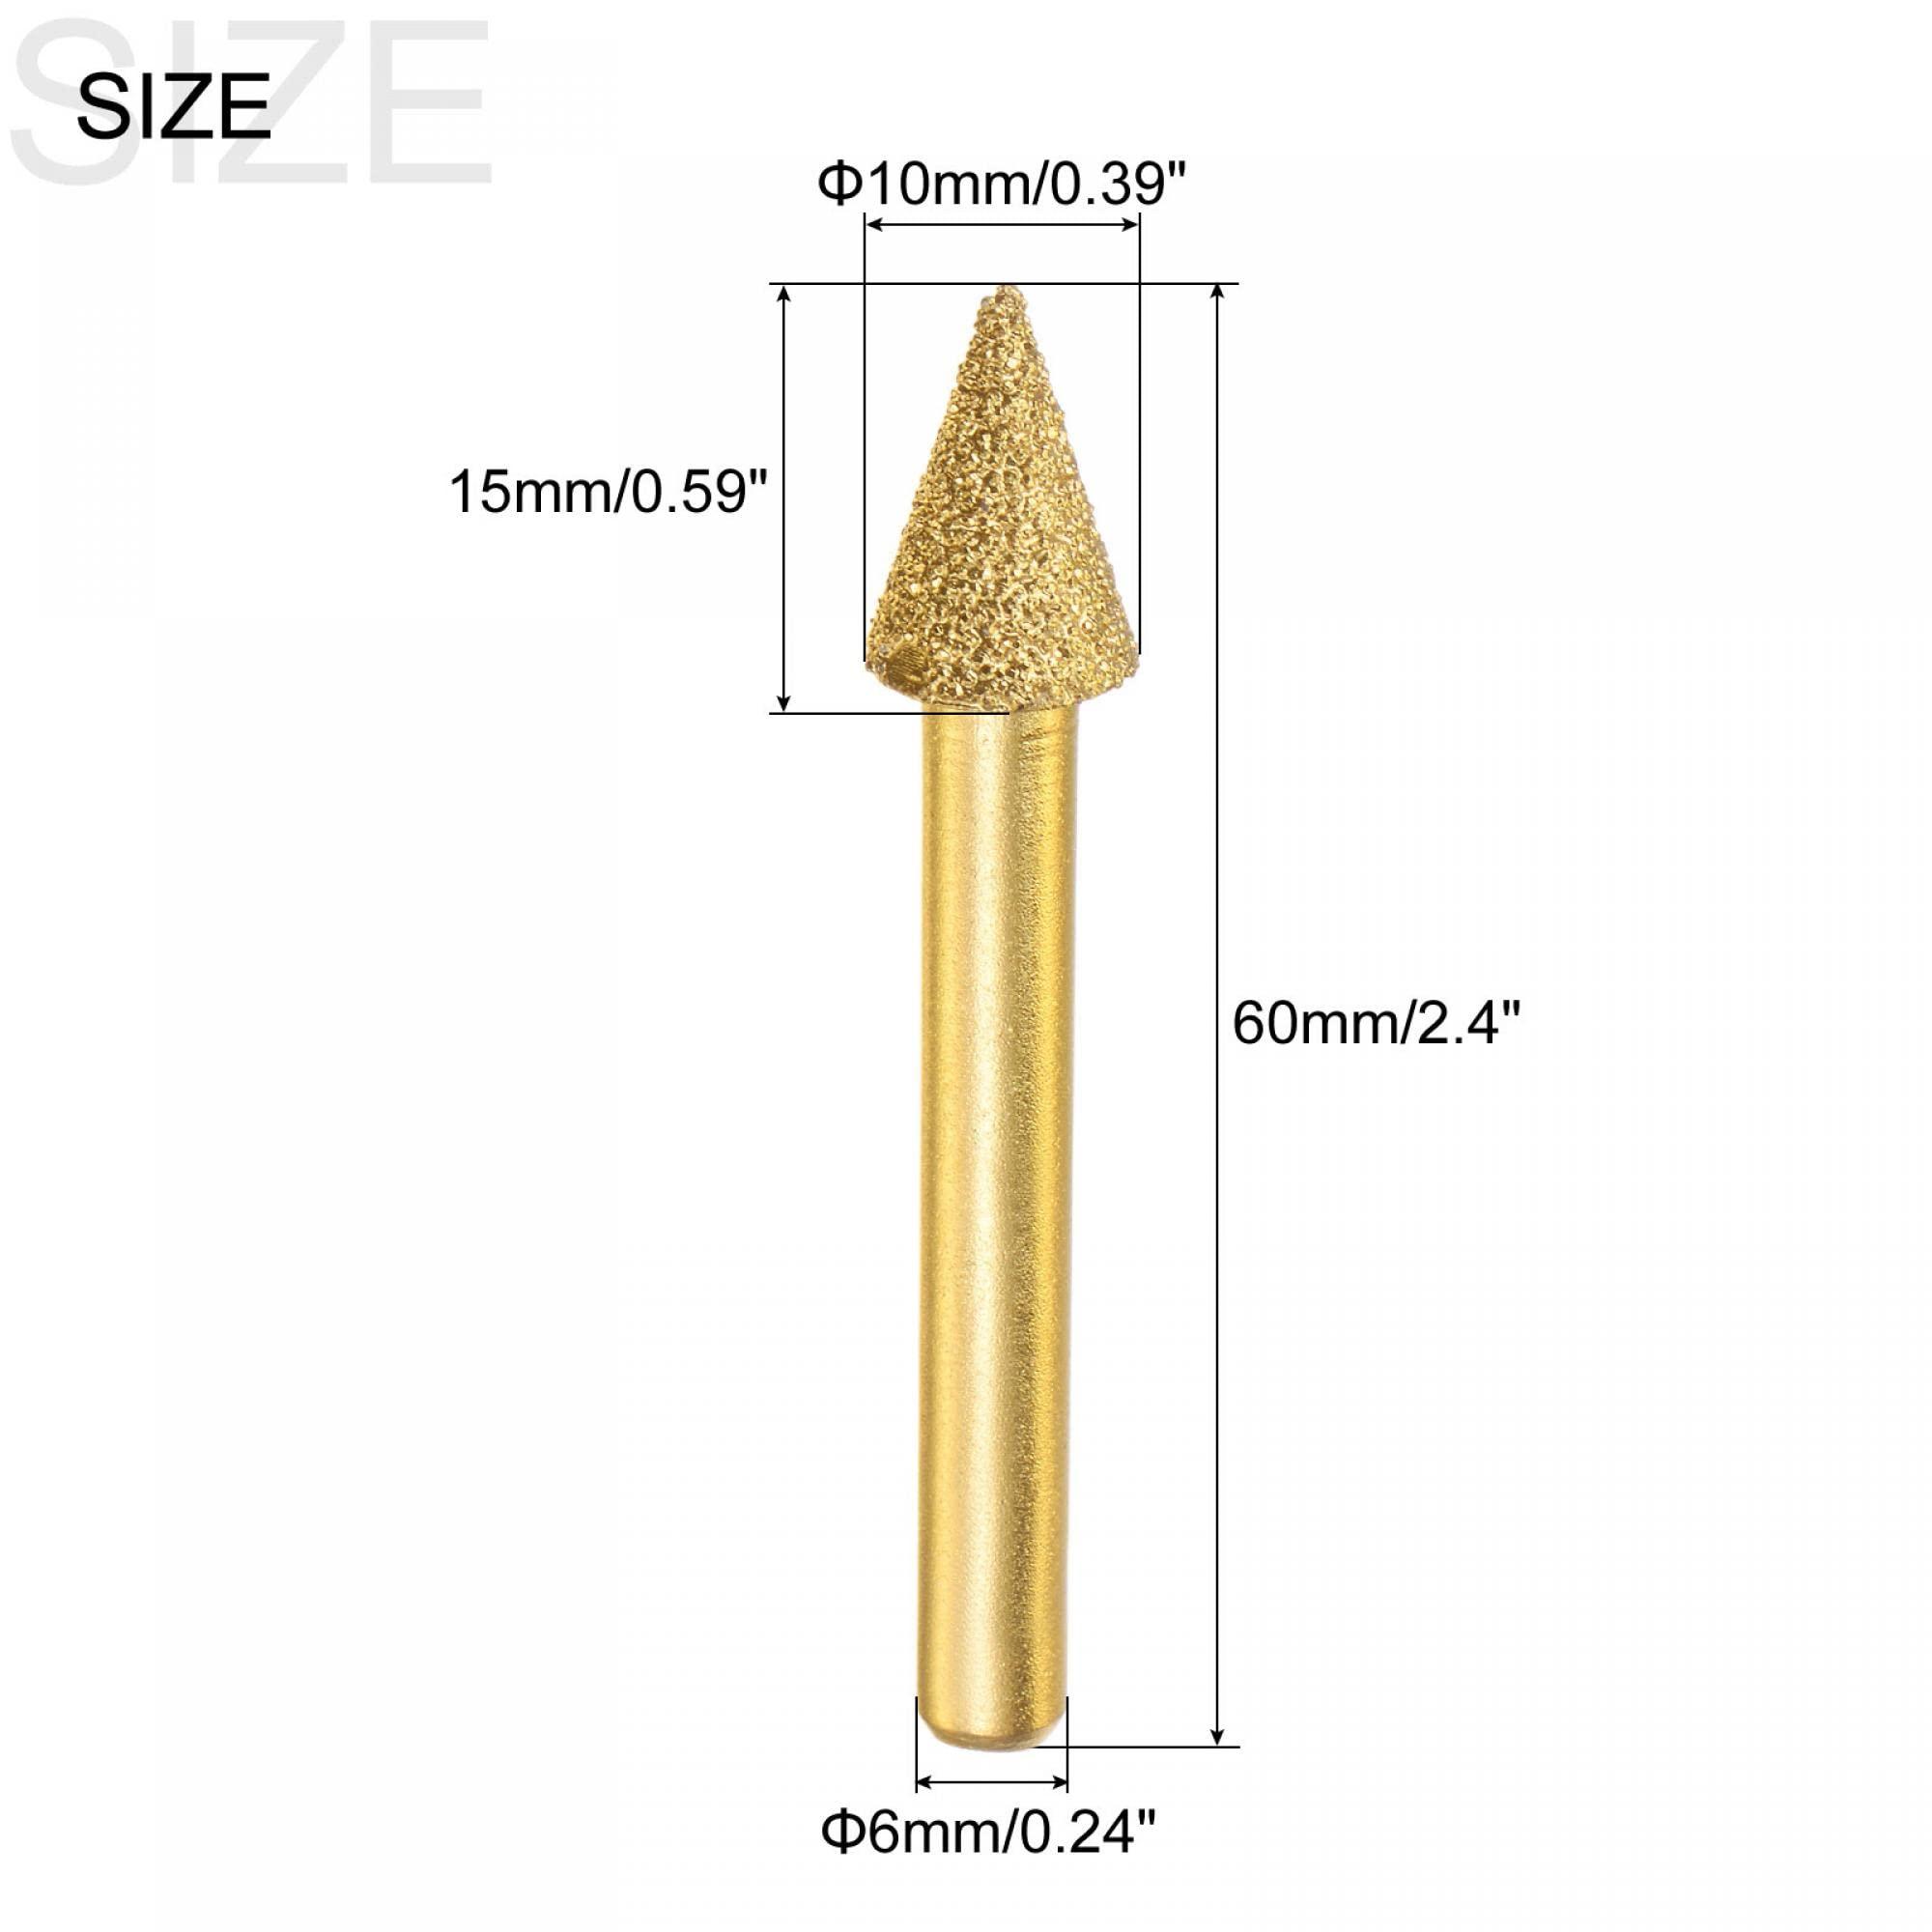 sourcing map 5Pcs Diamond Mounted Point 10mm Brazed Grinder Taper Head 6mm Shank Grinding Rotary Bit Marble Stone Carving Tool 1